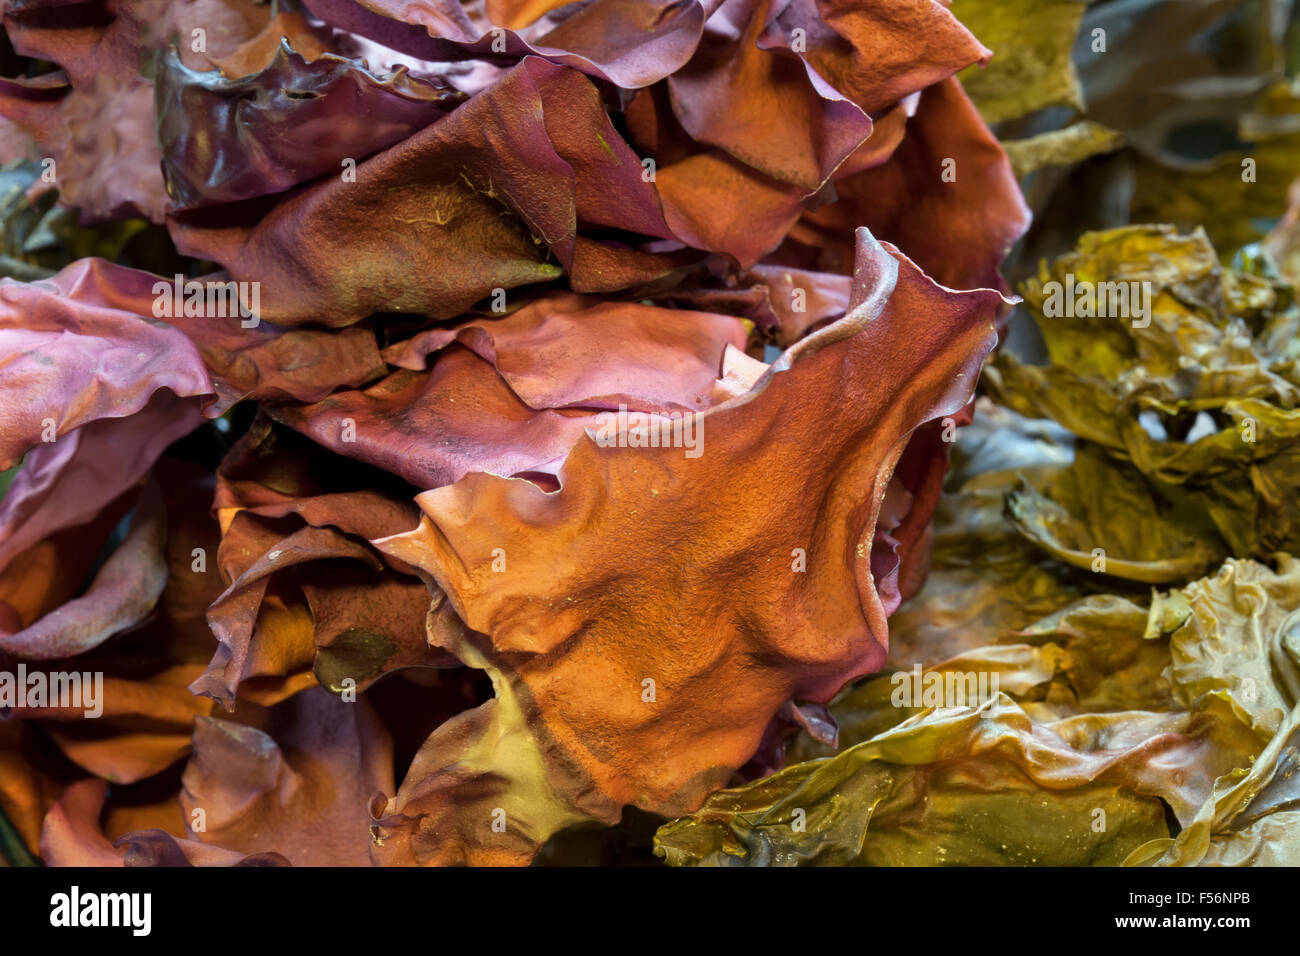 A mix of dulse and sea lettuce dried and ready for use in miso soup. Stock Photo